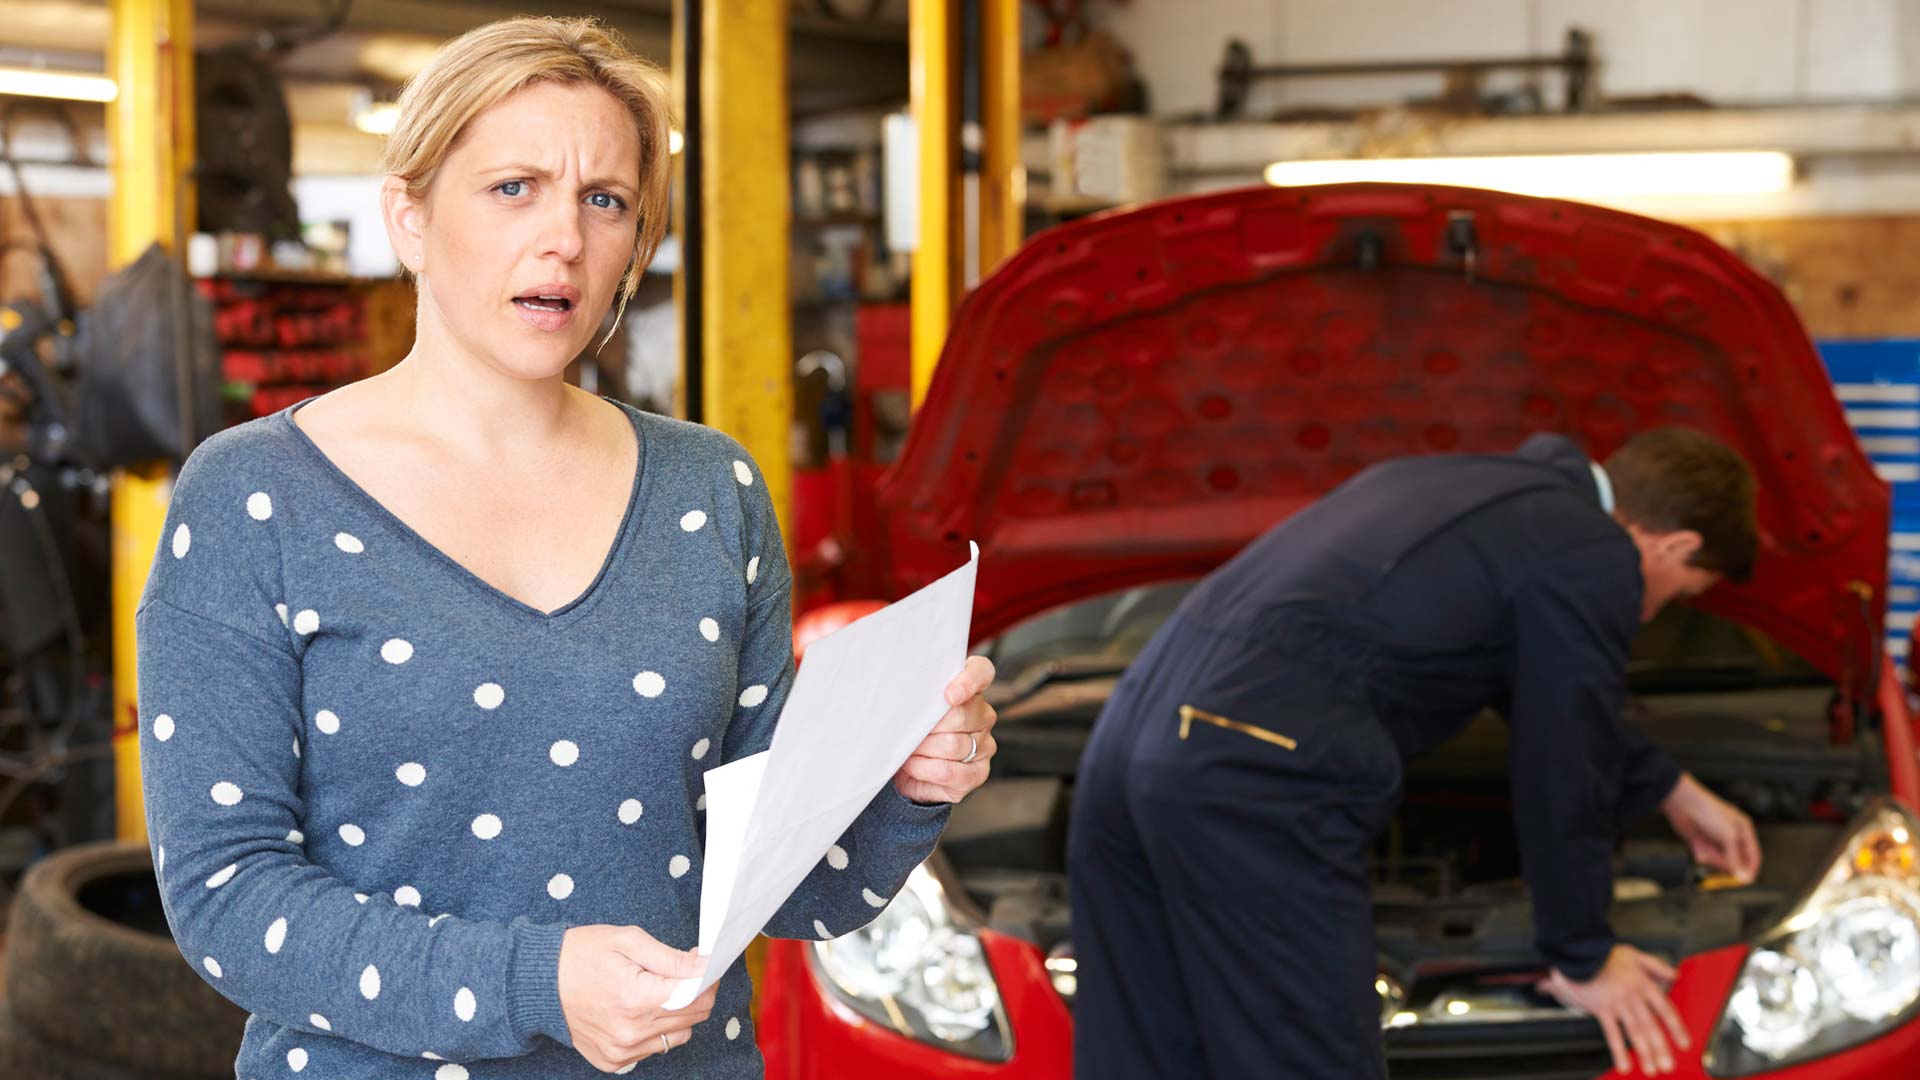 4 Most Dangerous Used Car Buying Mistakes